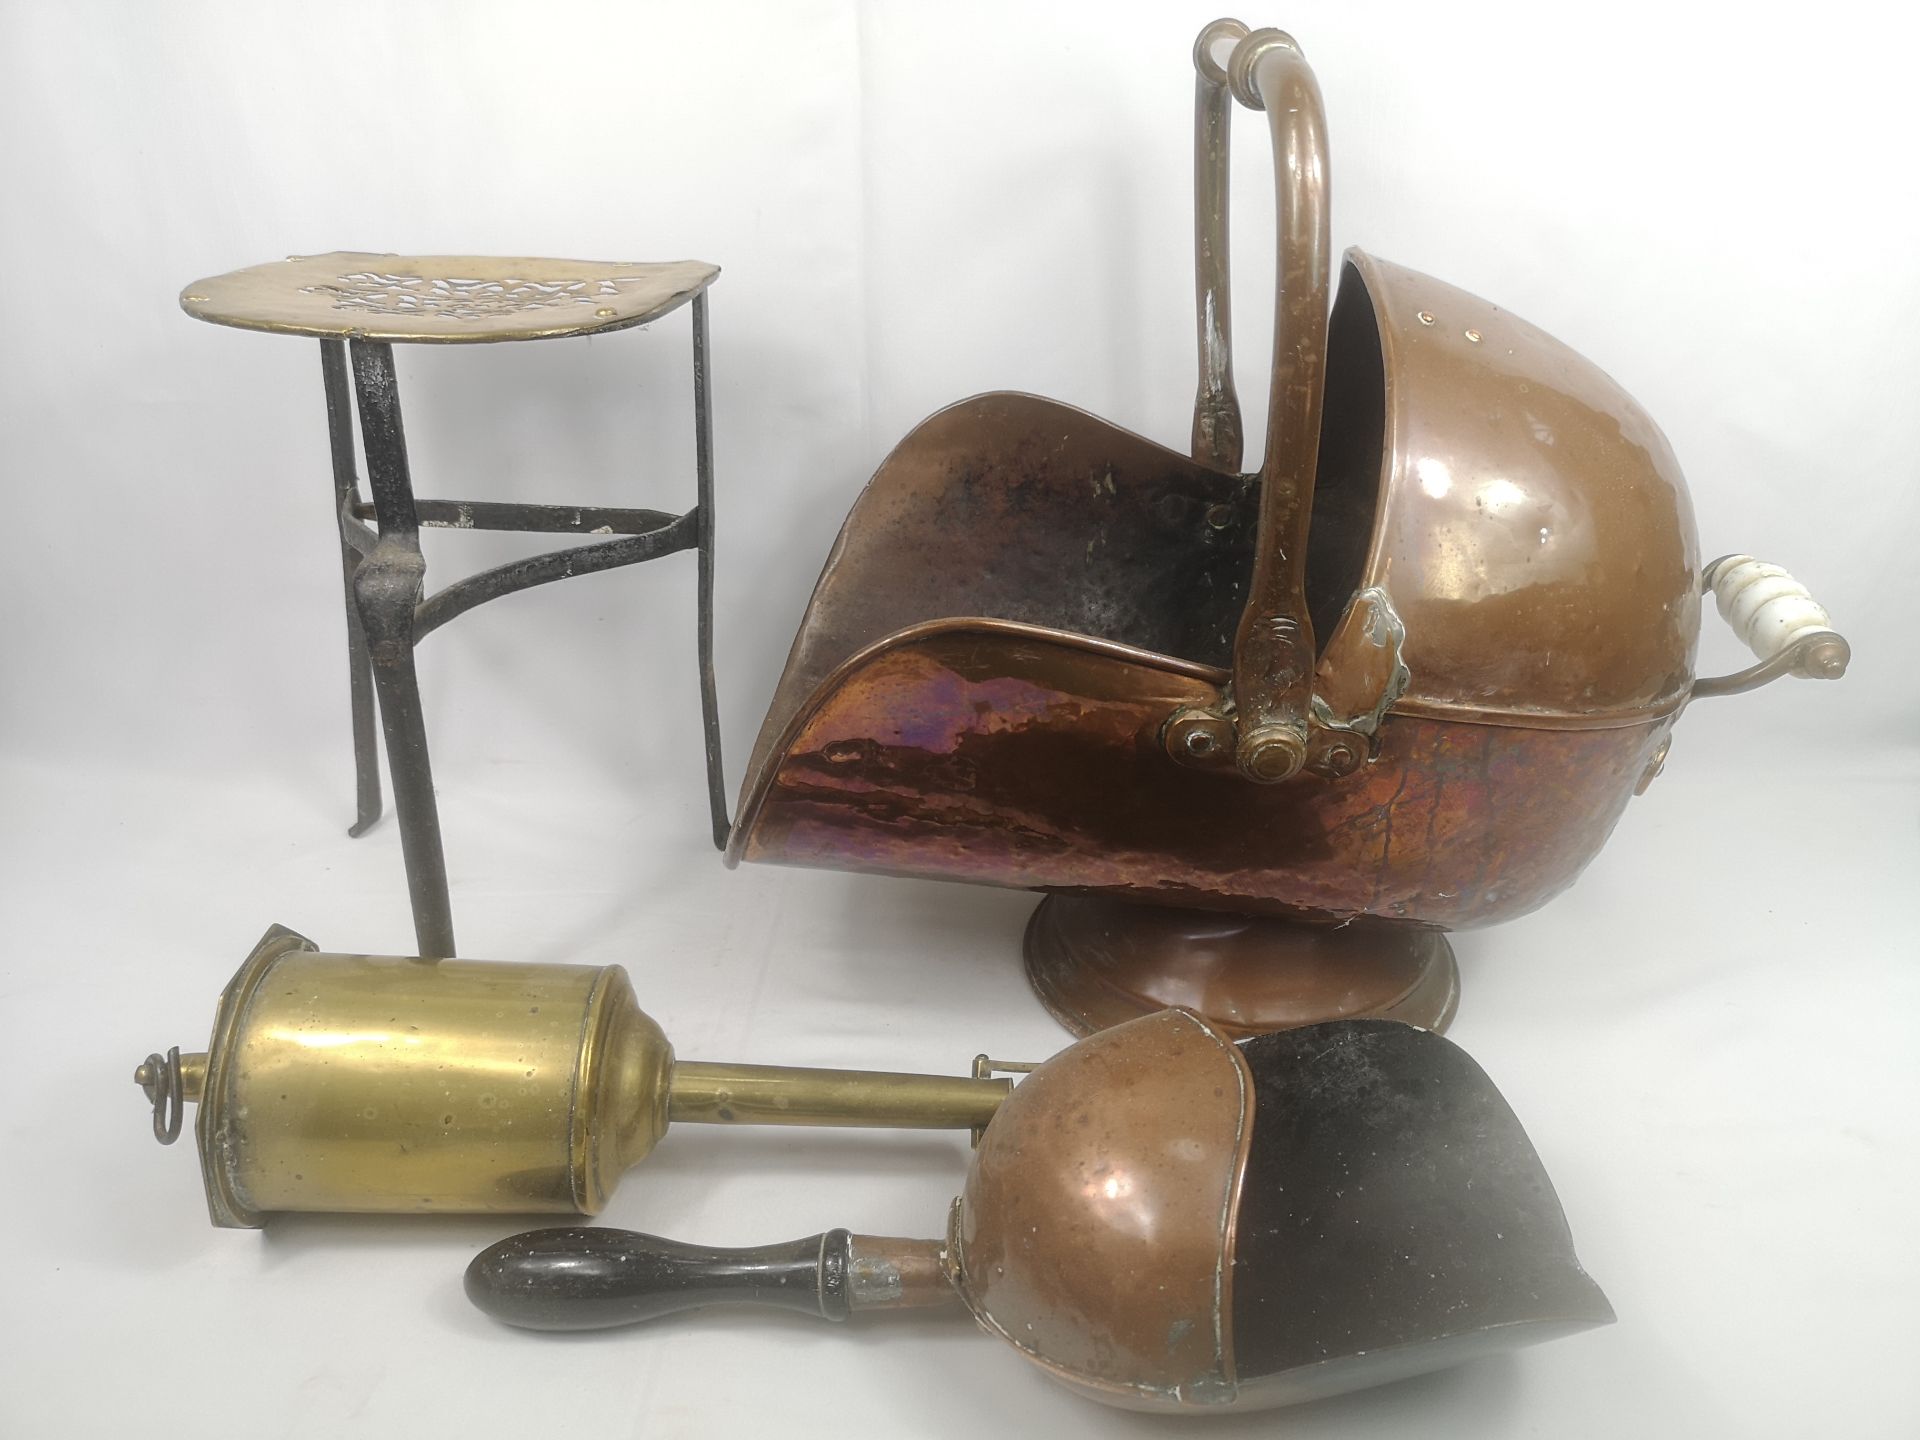 Copper coal scuttle and other items